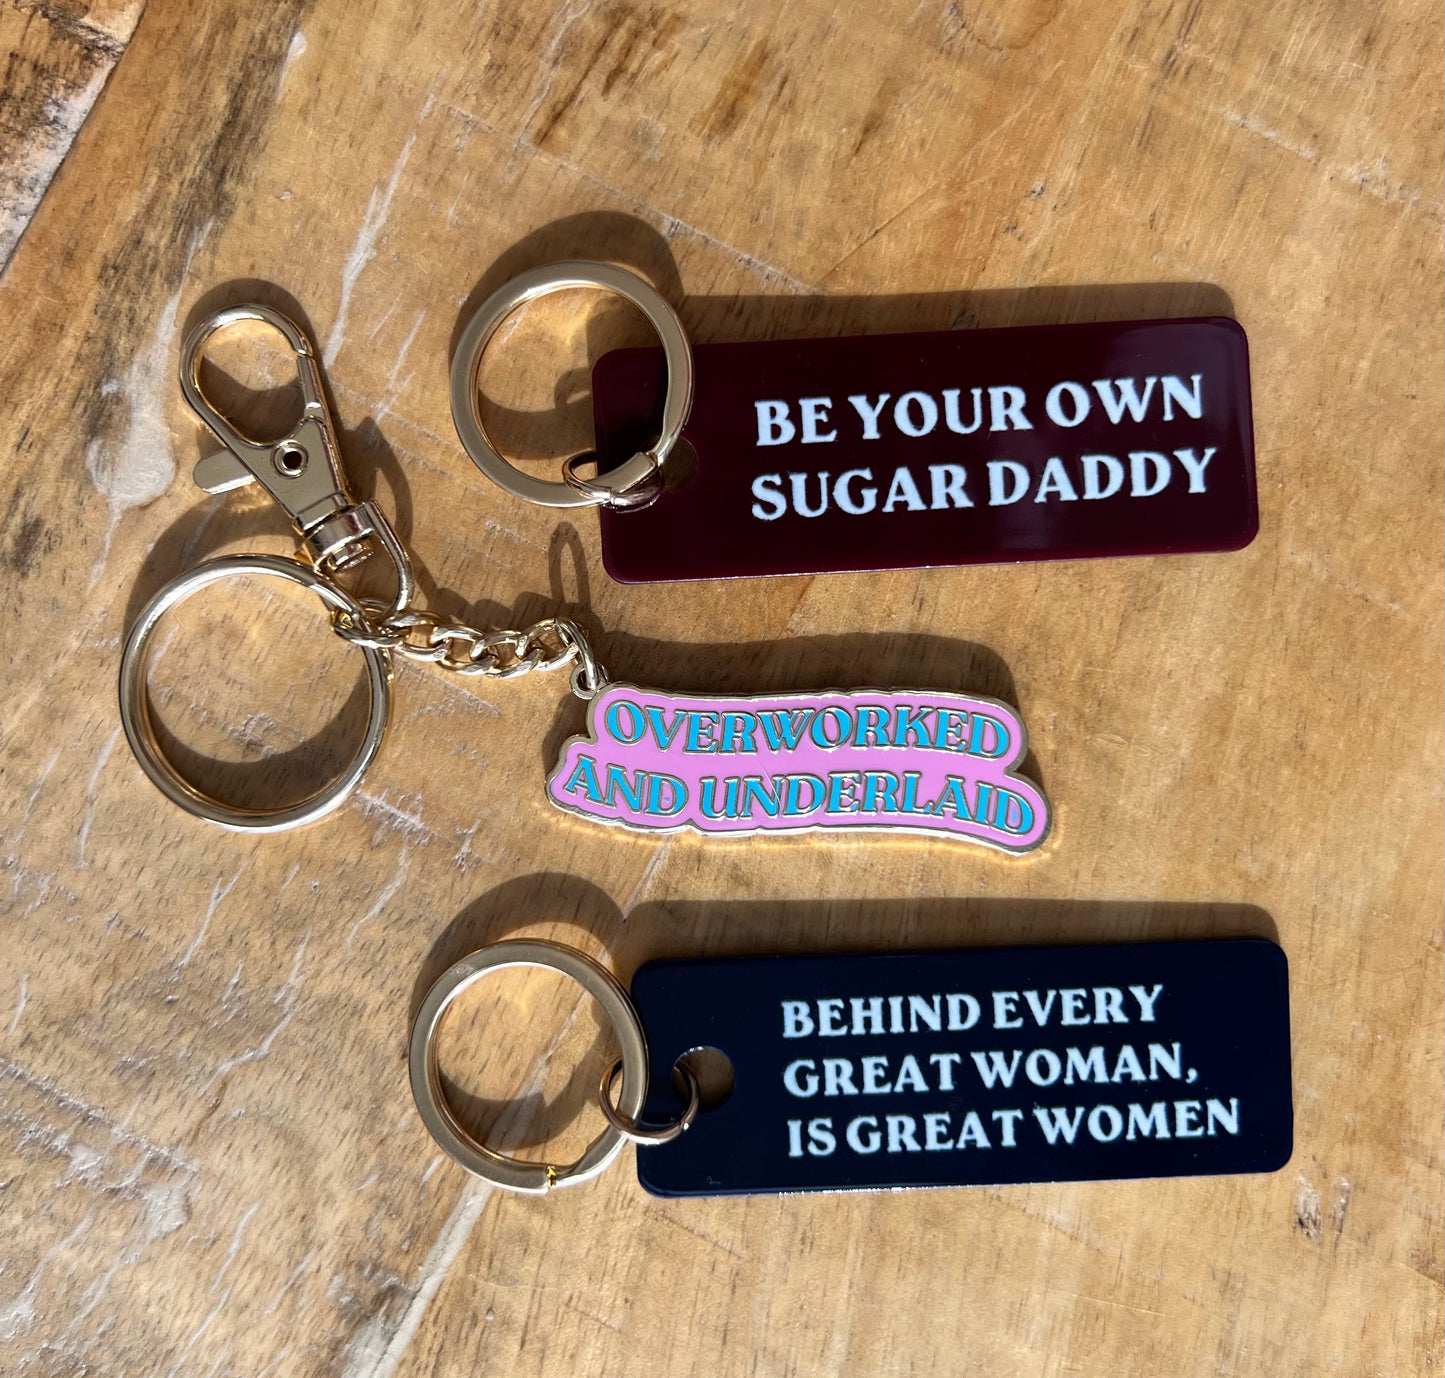 Behind Every Woman Keychain